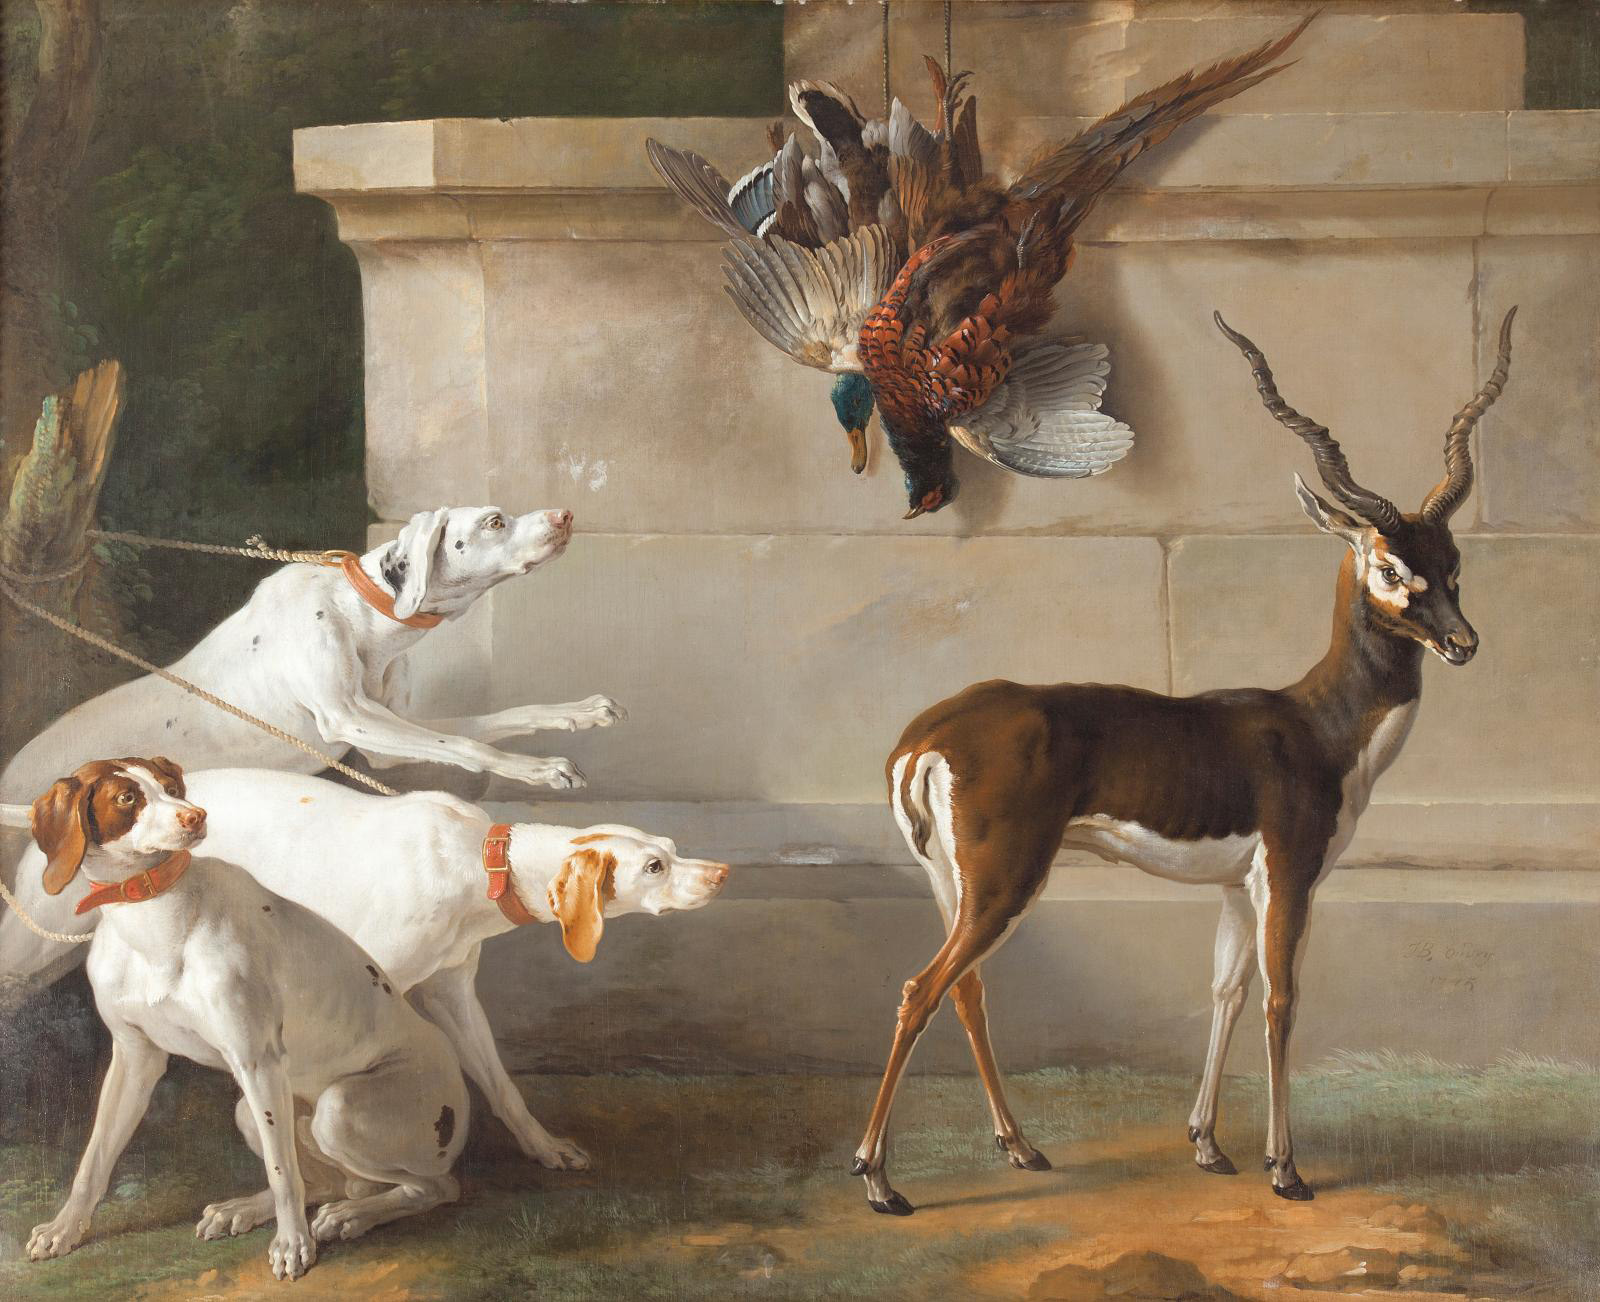 Royal Animals and Political Beasts During the Enlightenment